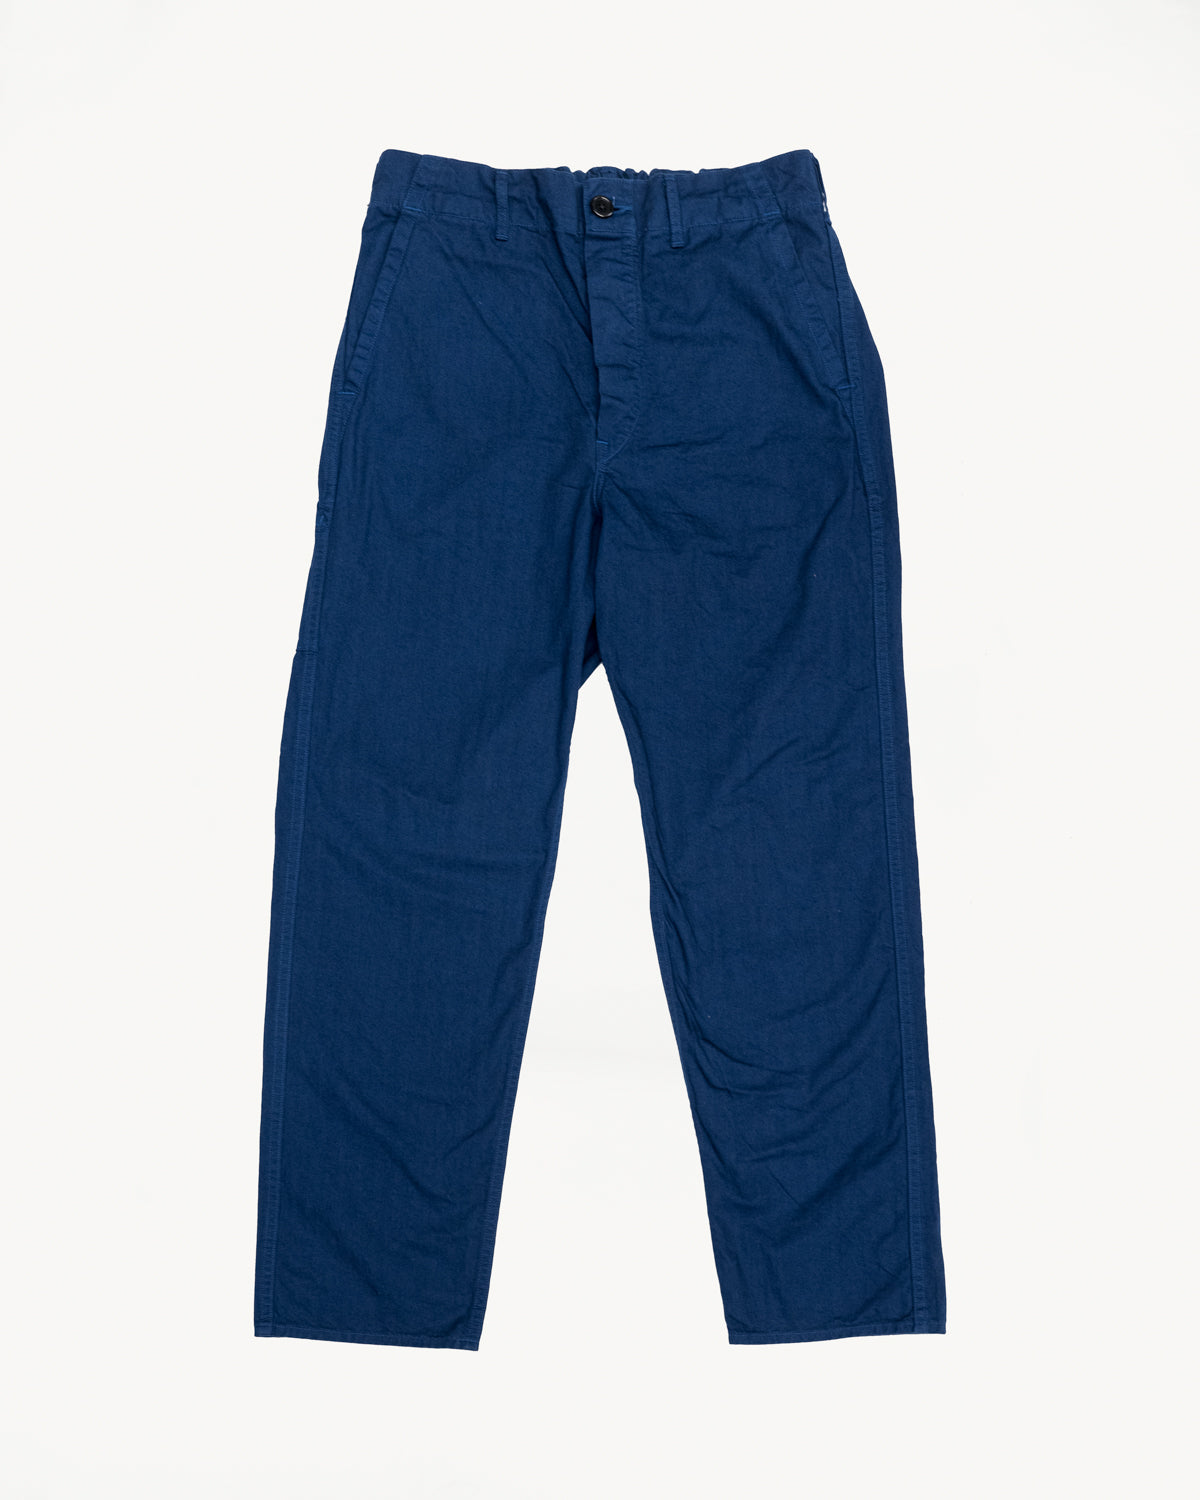 03-5000-03 - French Work Pant - French Blue